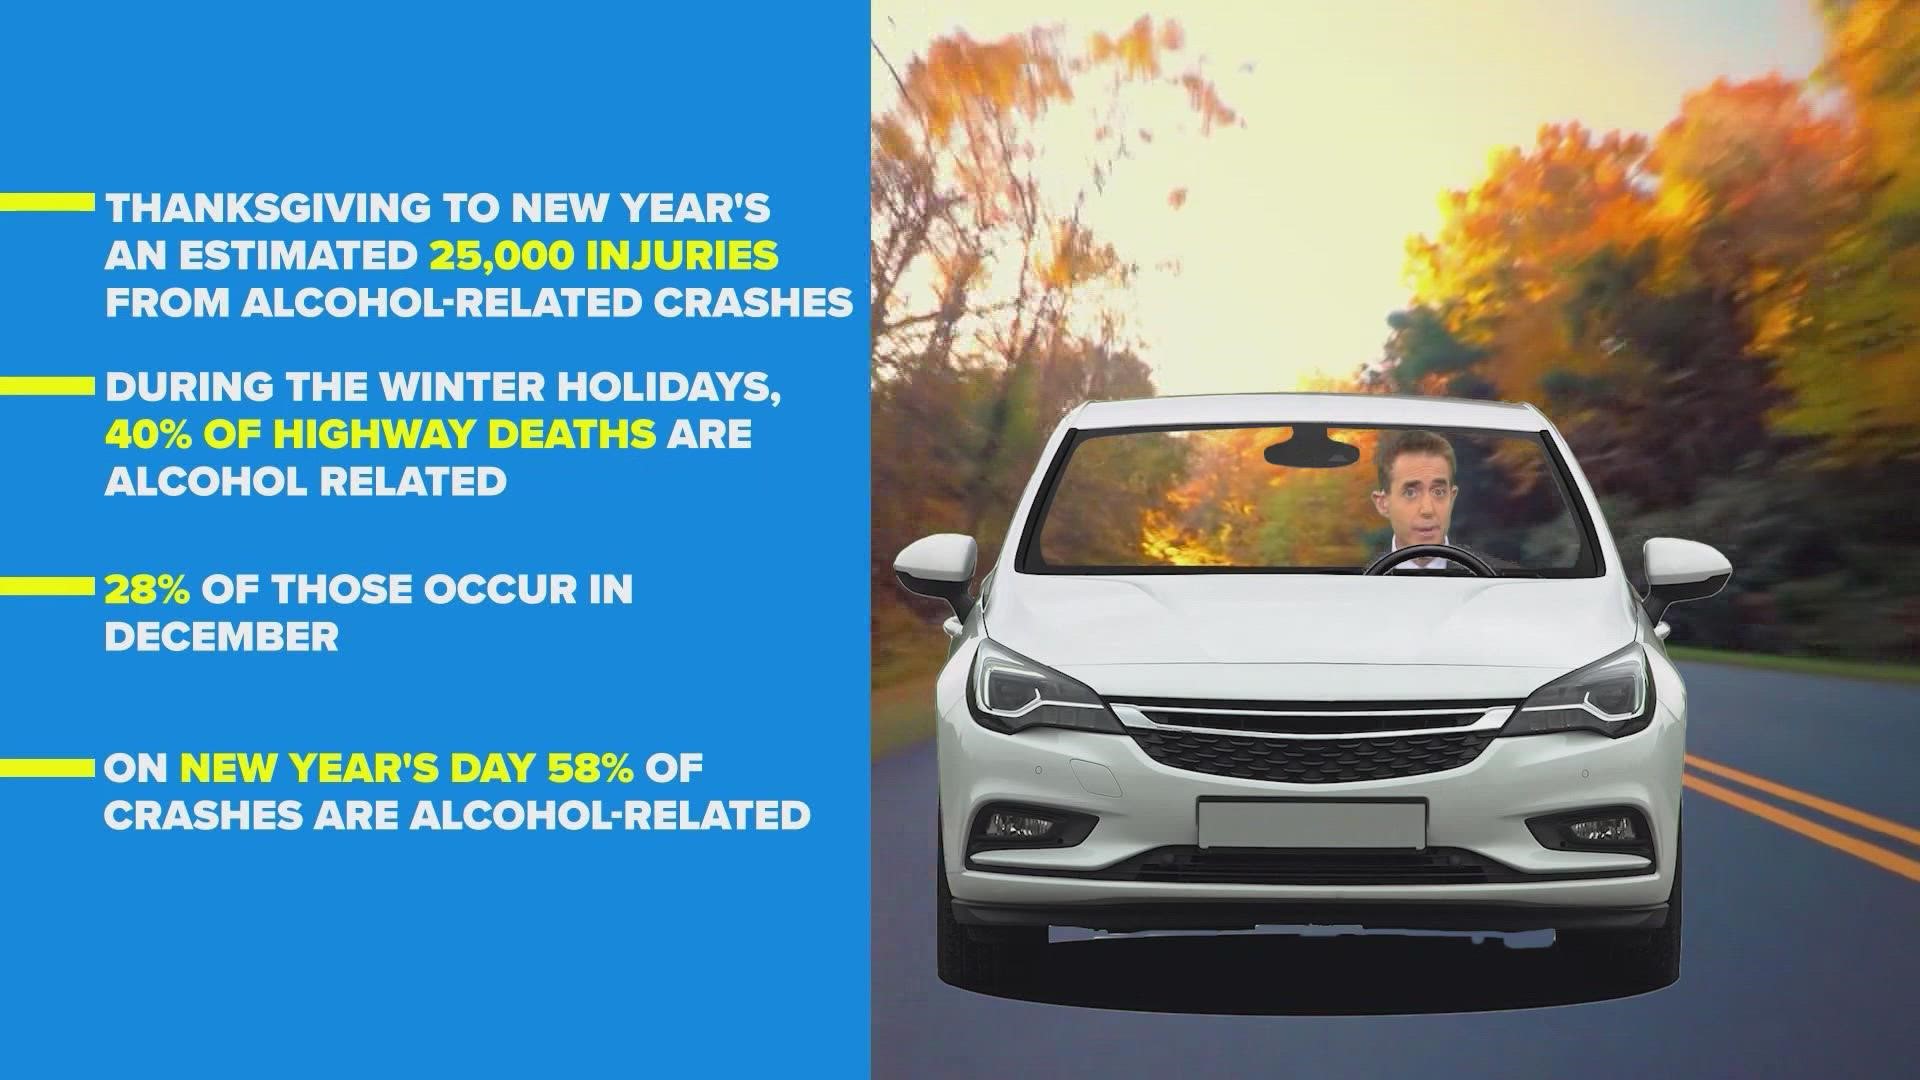 Many drivers more than double their alcohol consumption this time of year.